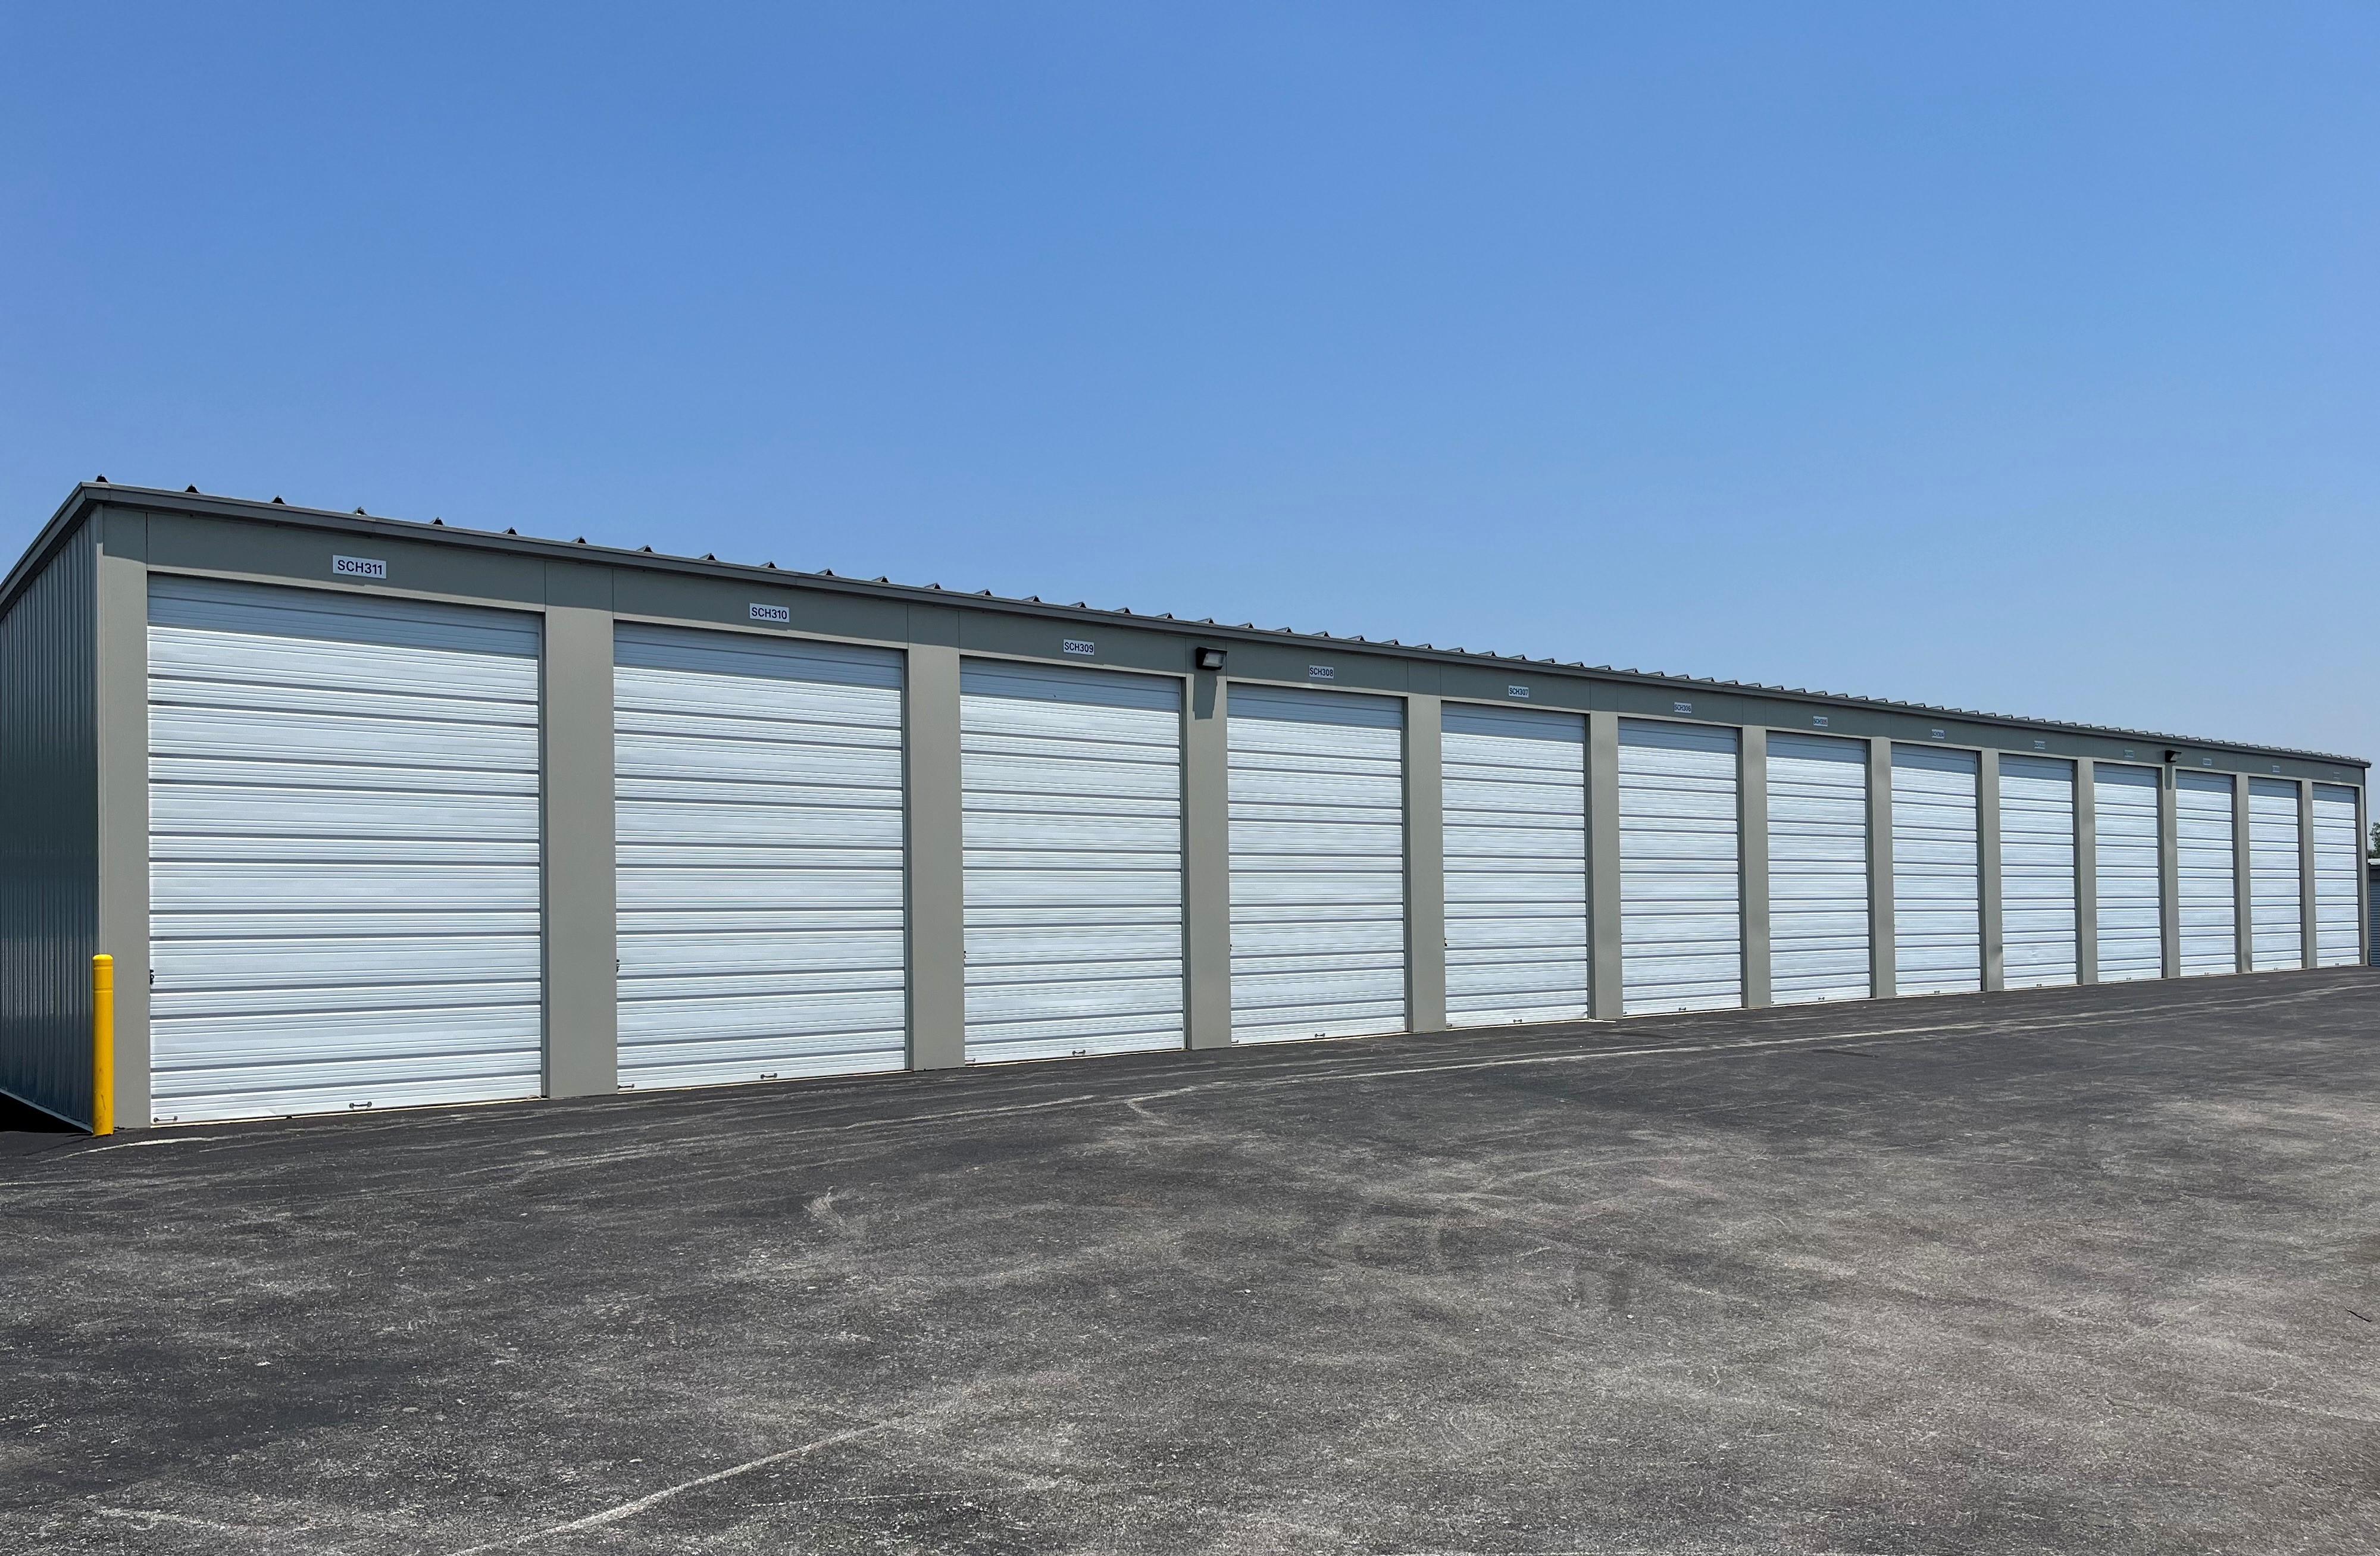 Drive-up self-storage at St Charles St in Jasper, IN, featuring wide, paved driveways, white roll-up doors, and gated access for security.